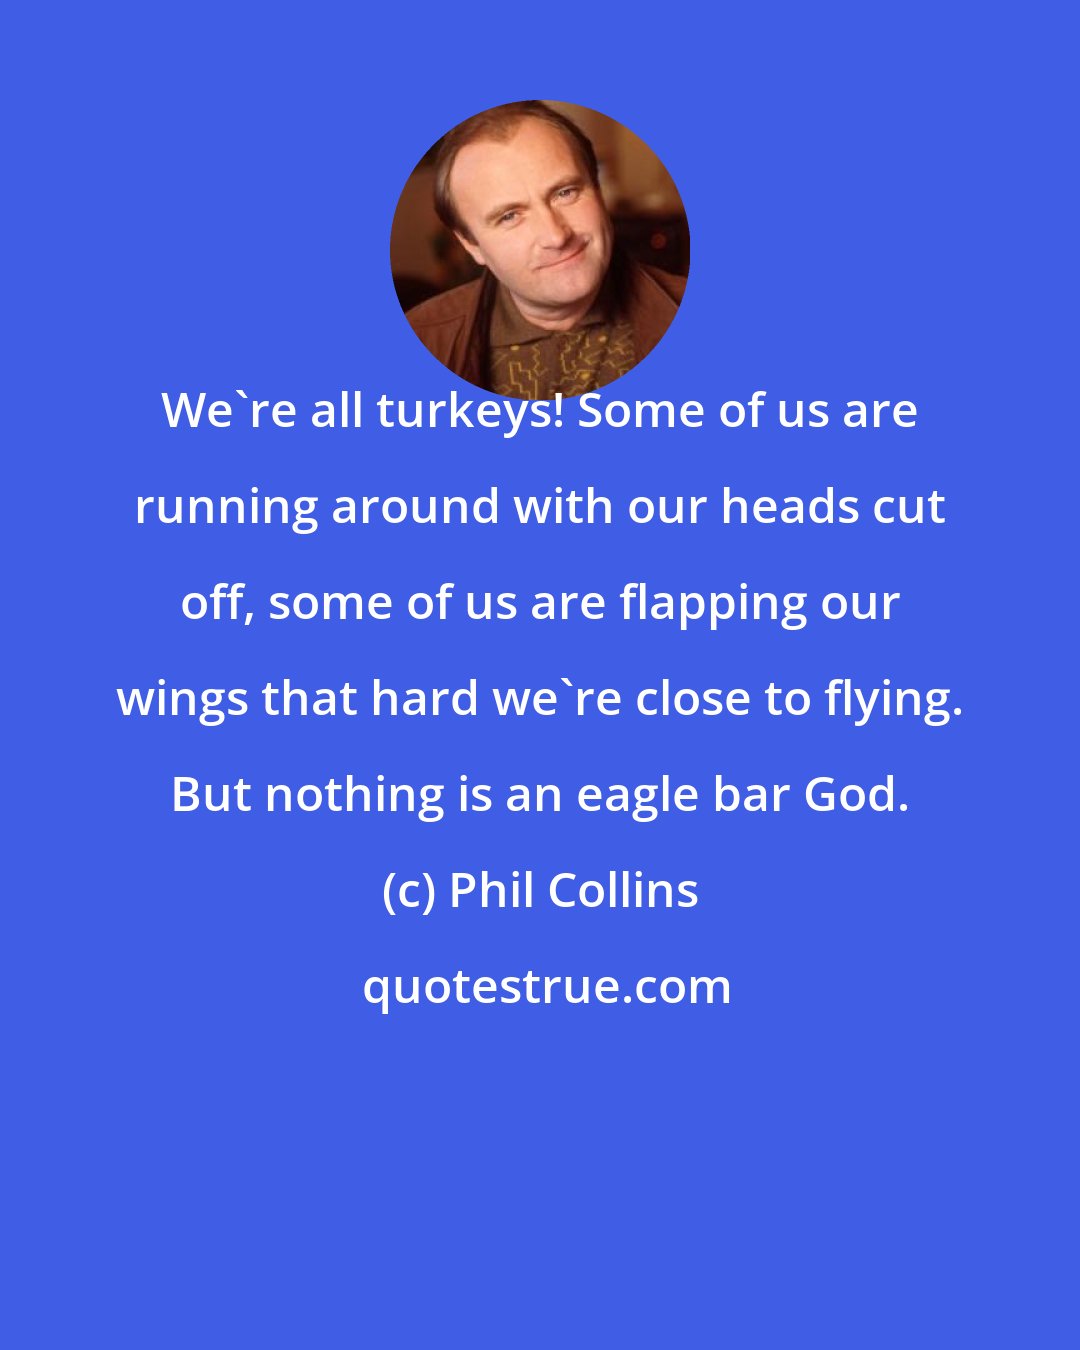 Phil Collins: We're all turkeys! Some of us are running around with our heads cut off, some of us are flapping our wings that hard we're close to flying. But nothing is an eagle bar God.